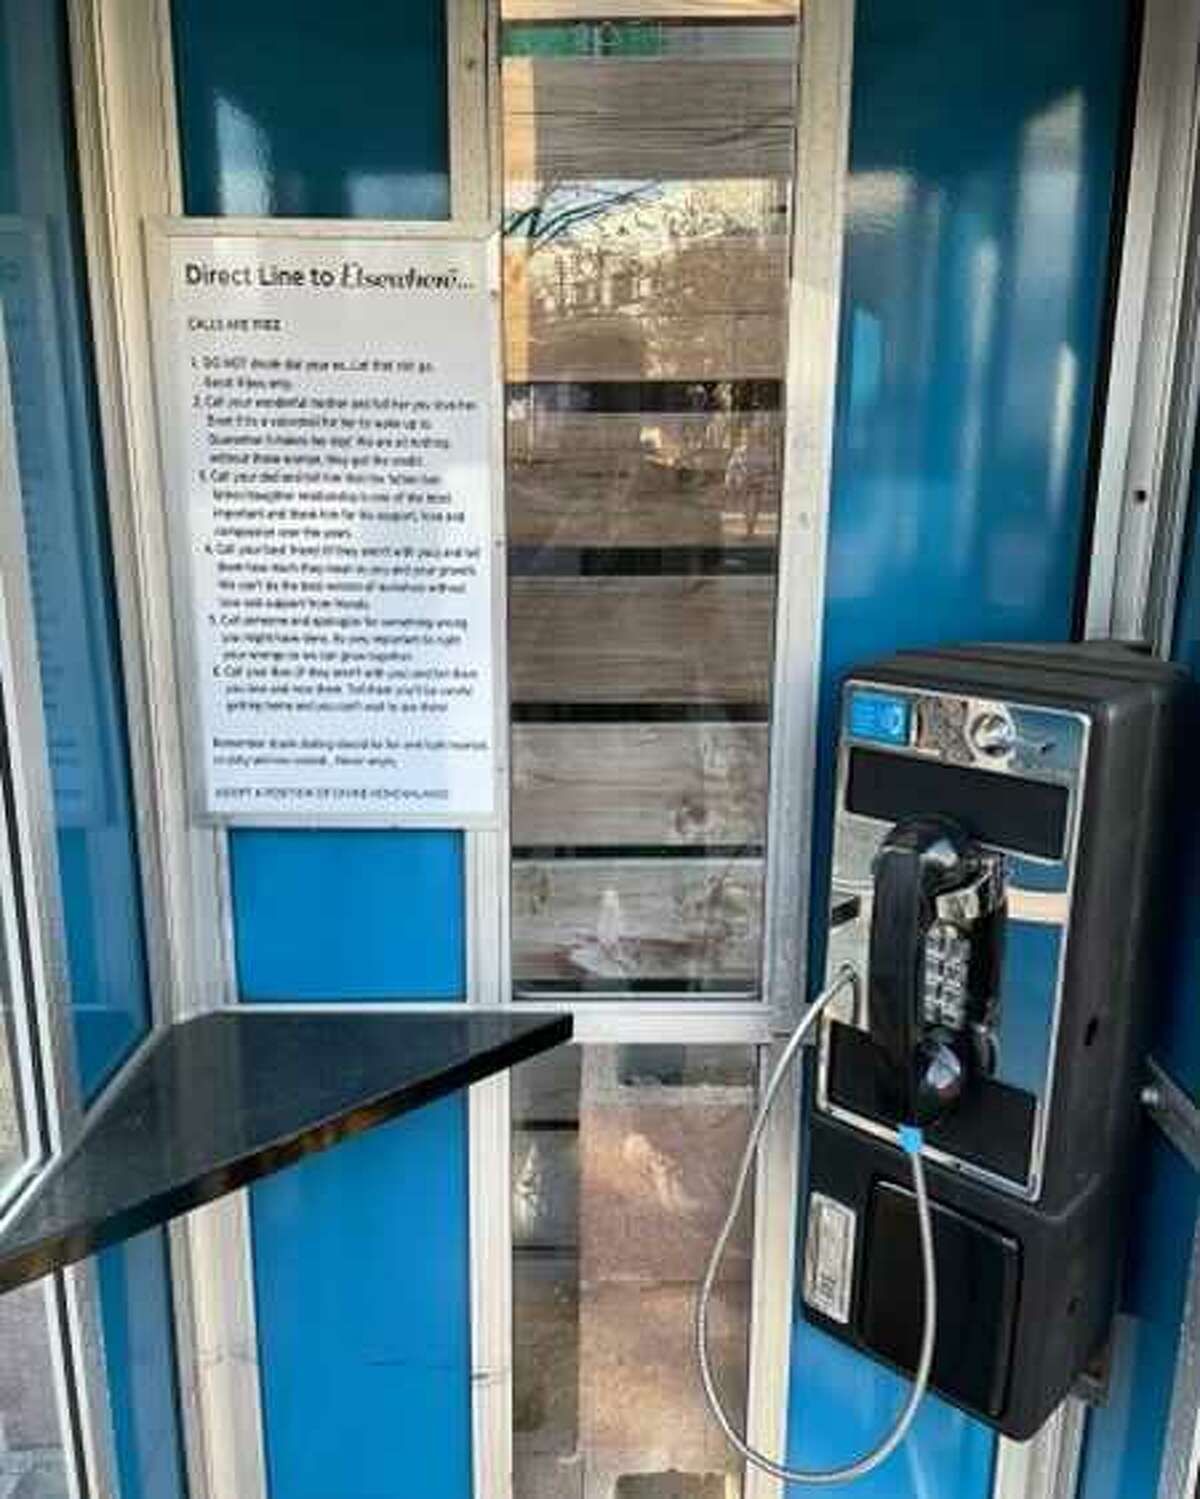 In addition to the new balloon ceiling, Fuhrmann brought in a fun 1980s phonebooth that customers can use for free – you just have to follow a list of drunk dialing rules, like not calling that ex.